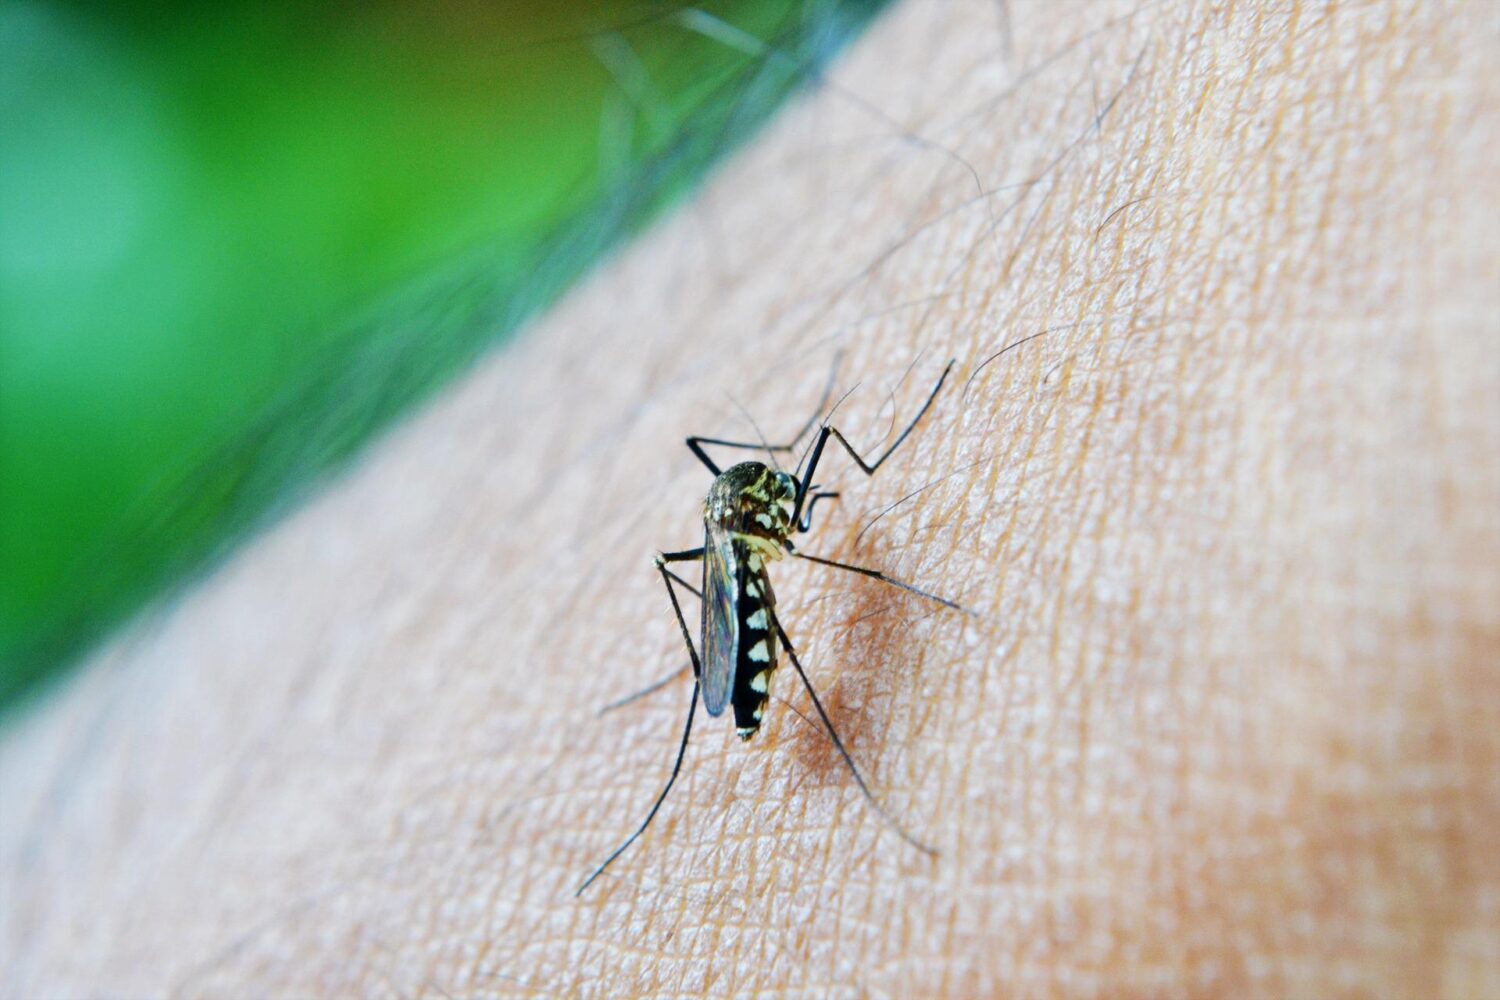 23 dengue cases reported in June in Delhi, 134 so far this year